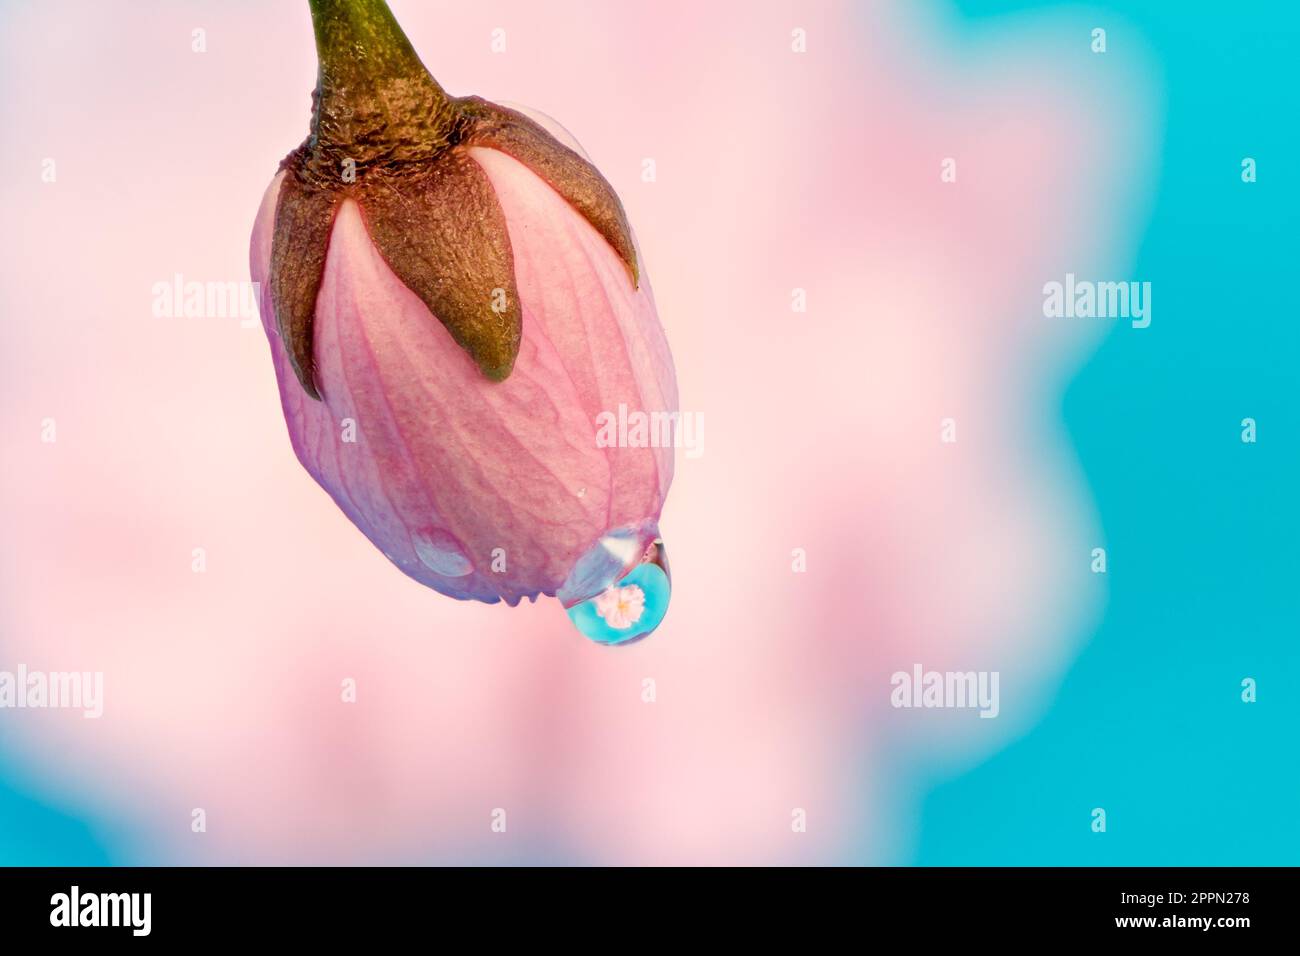 Dew drop on a cherry blossom bud with refraction of a flower Stock Photo